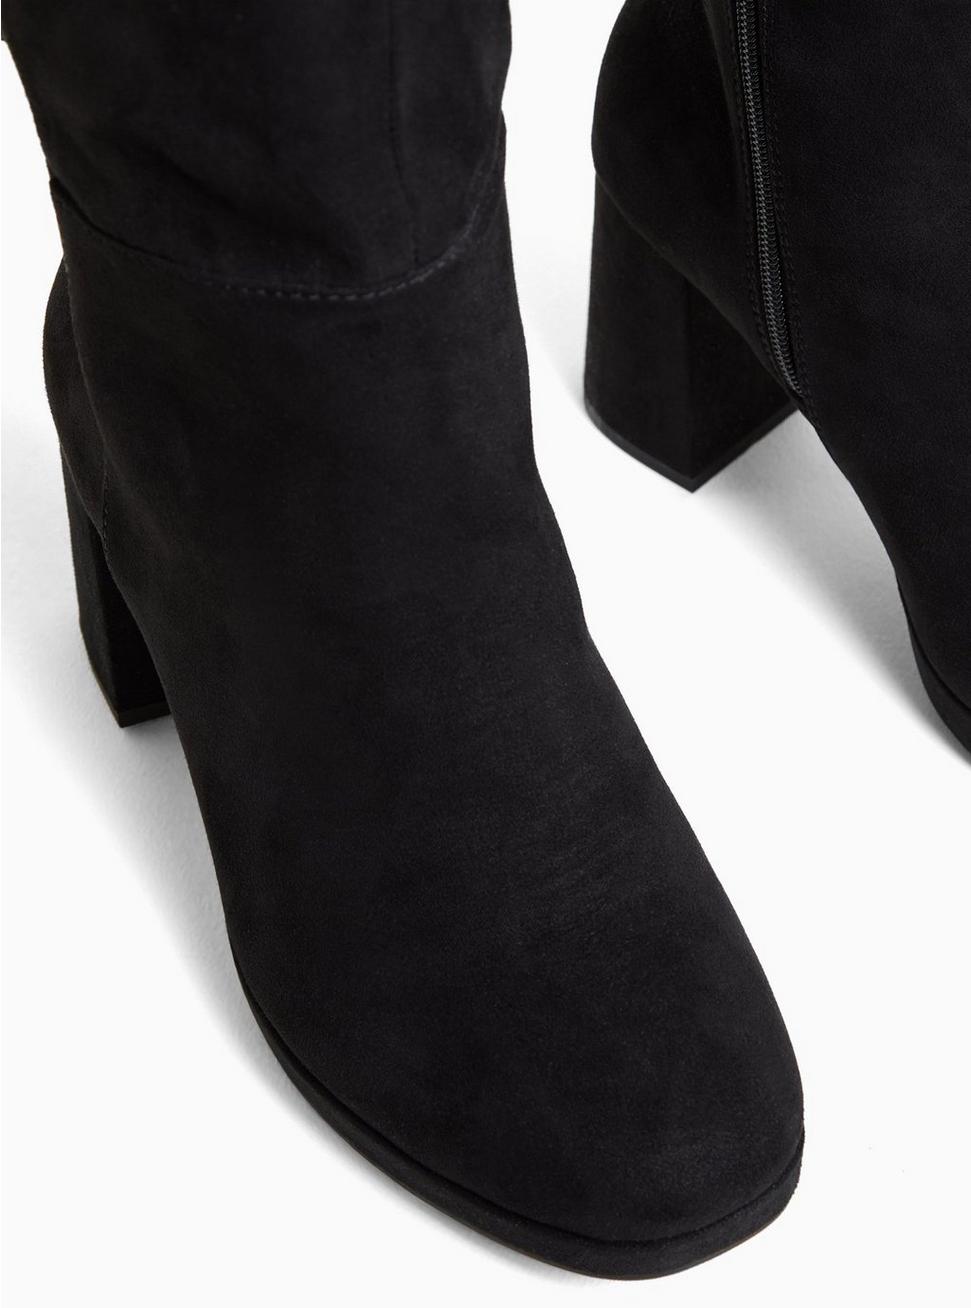 Plus Size - Black Faux Suede Bow Over-The-Knee Boot (WW) - Torrid